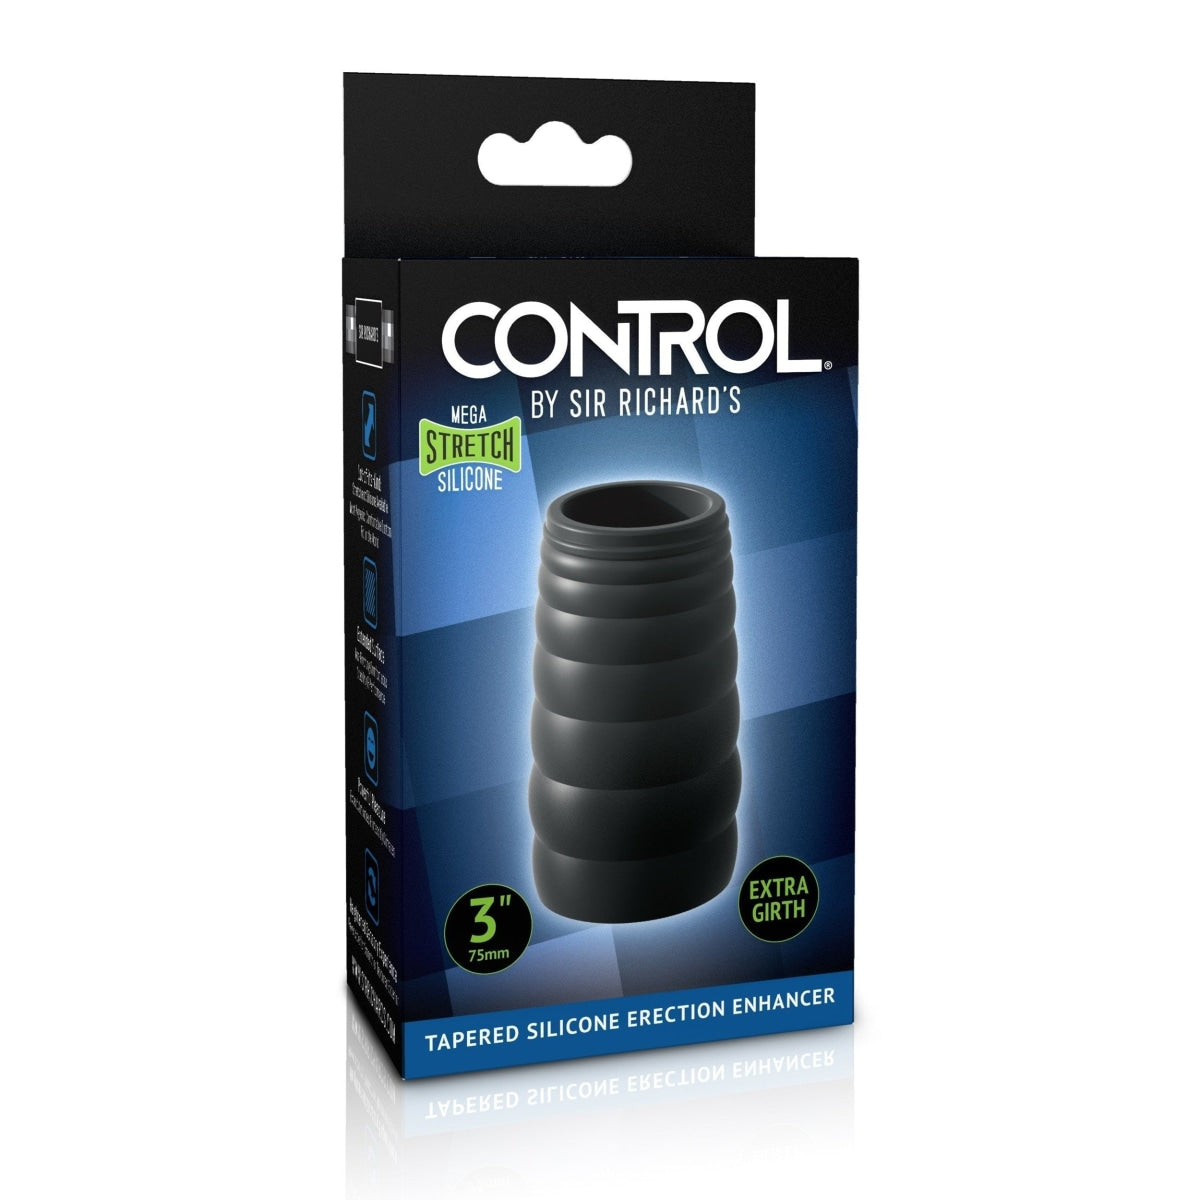 Sir Richard's Control Silicone Tapered Erection Enhancer Intimates Adult Boutique